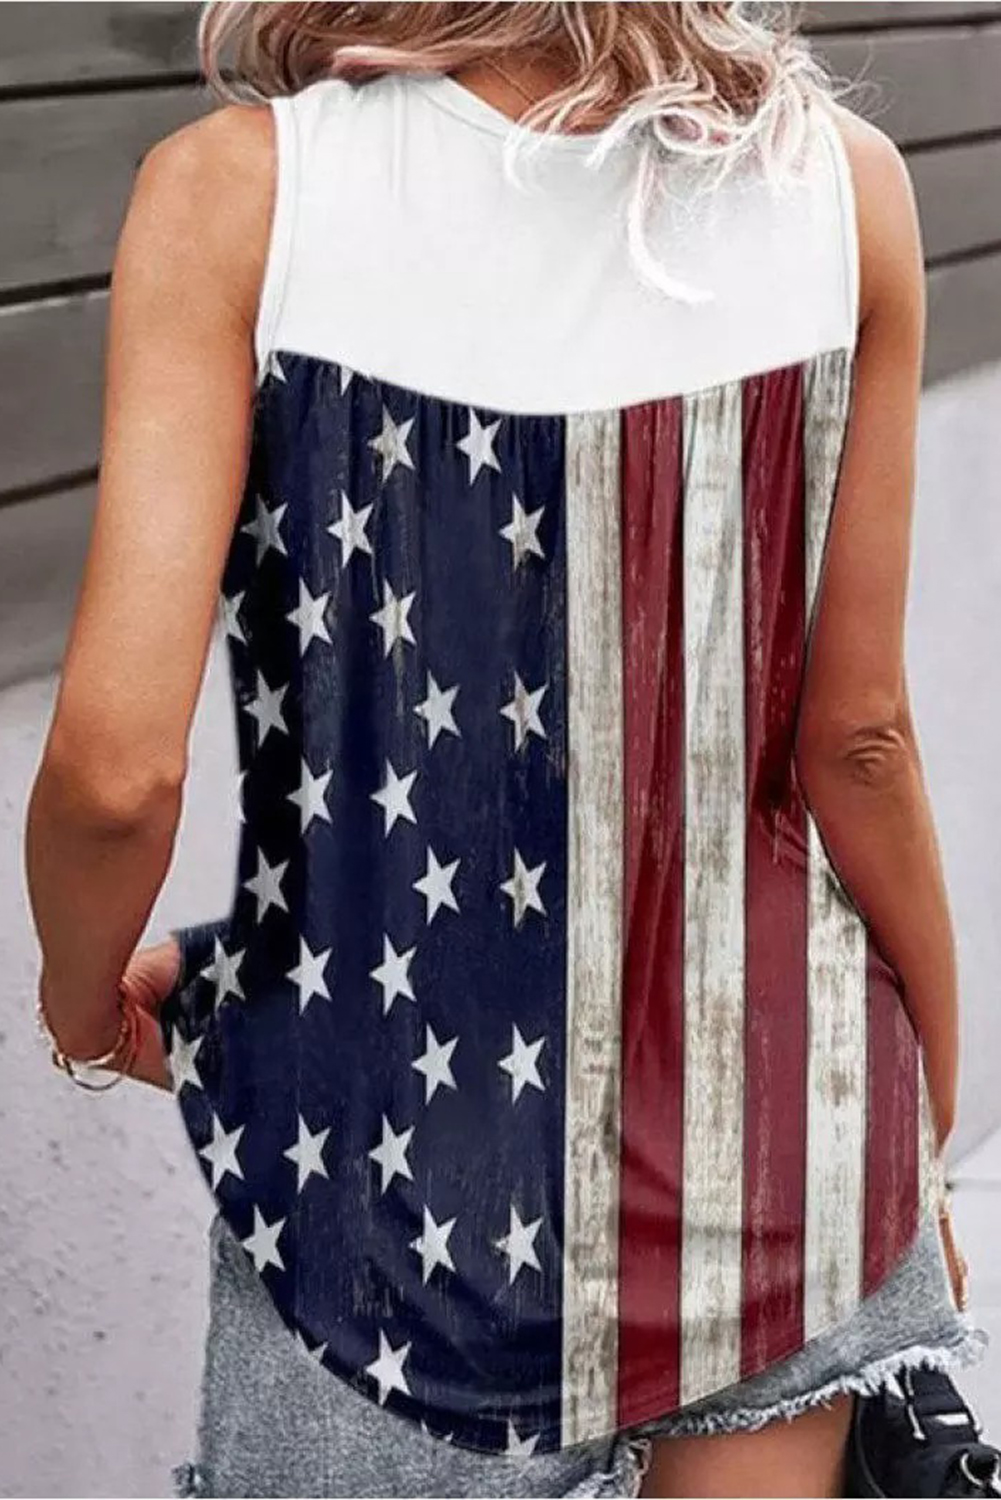 US$ 5.41 Drop-shipping American Flag Lace Patchwork Tank Top for Women